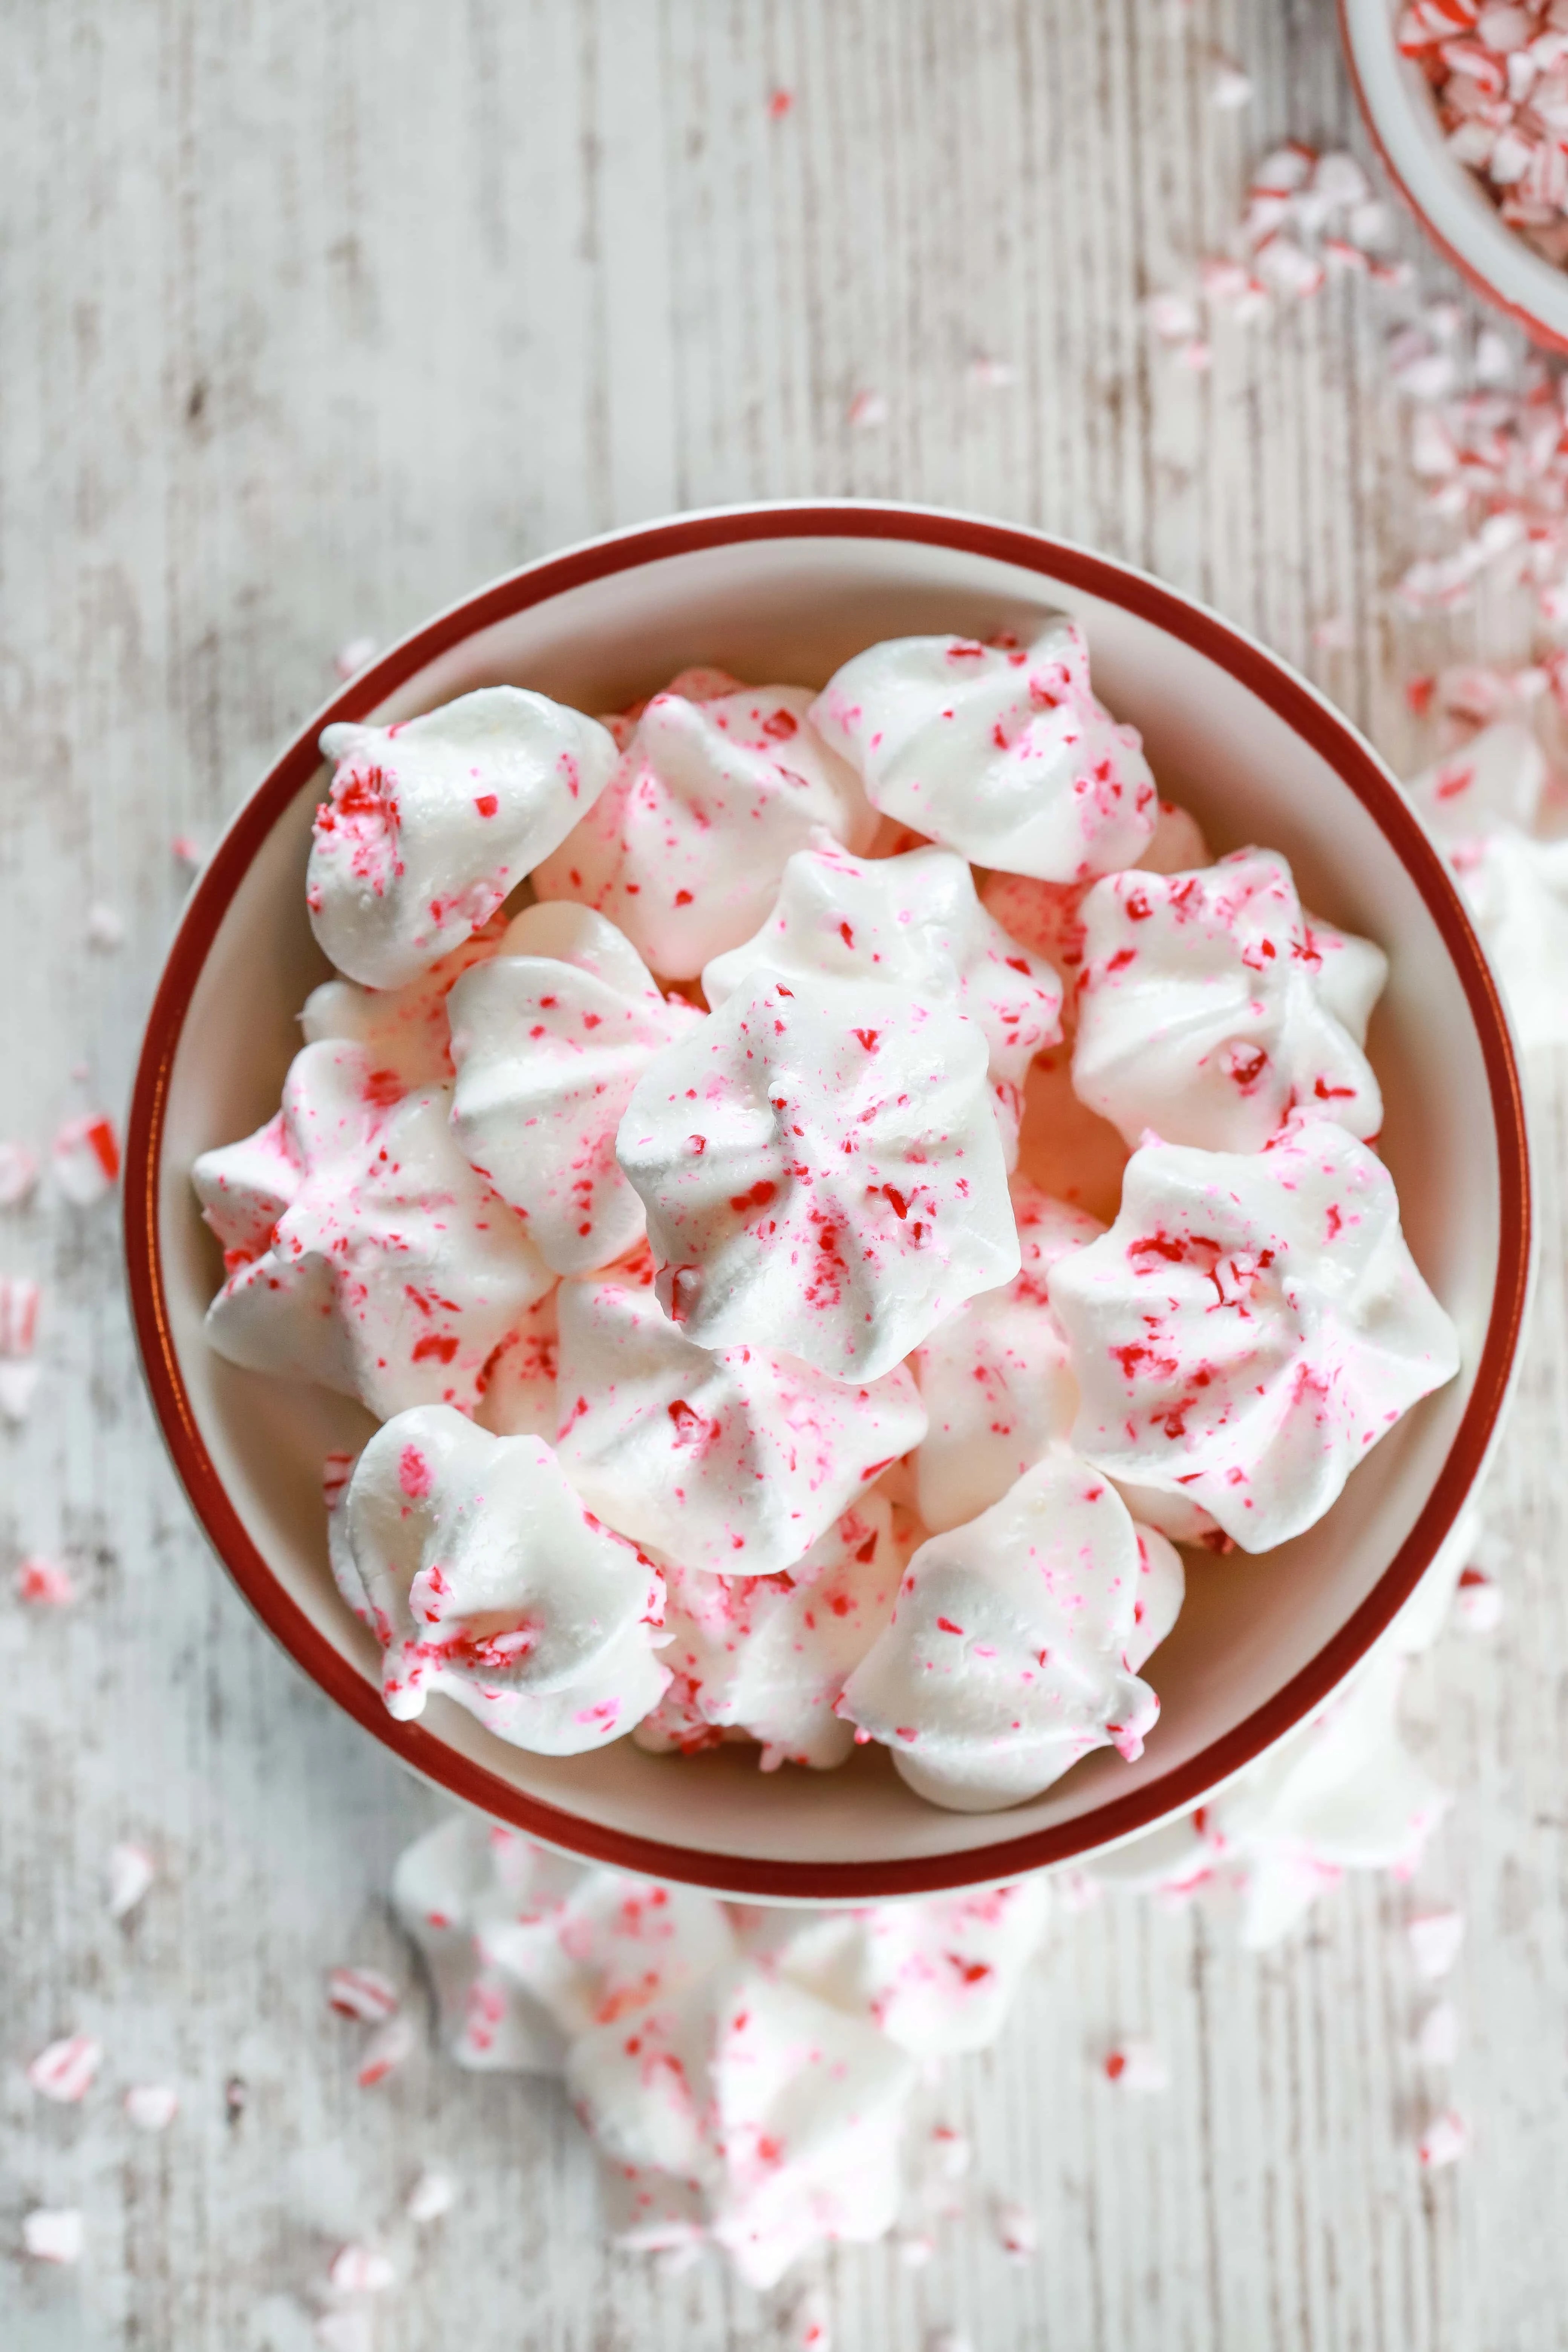 Overhead view of a white bowl of Mini Peppermint Meringue Kiss Cookies surrounded by crushed peppermint candies. Recipe for meringue cookies from A Kitchen Addiction